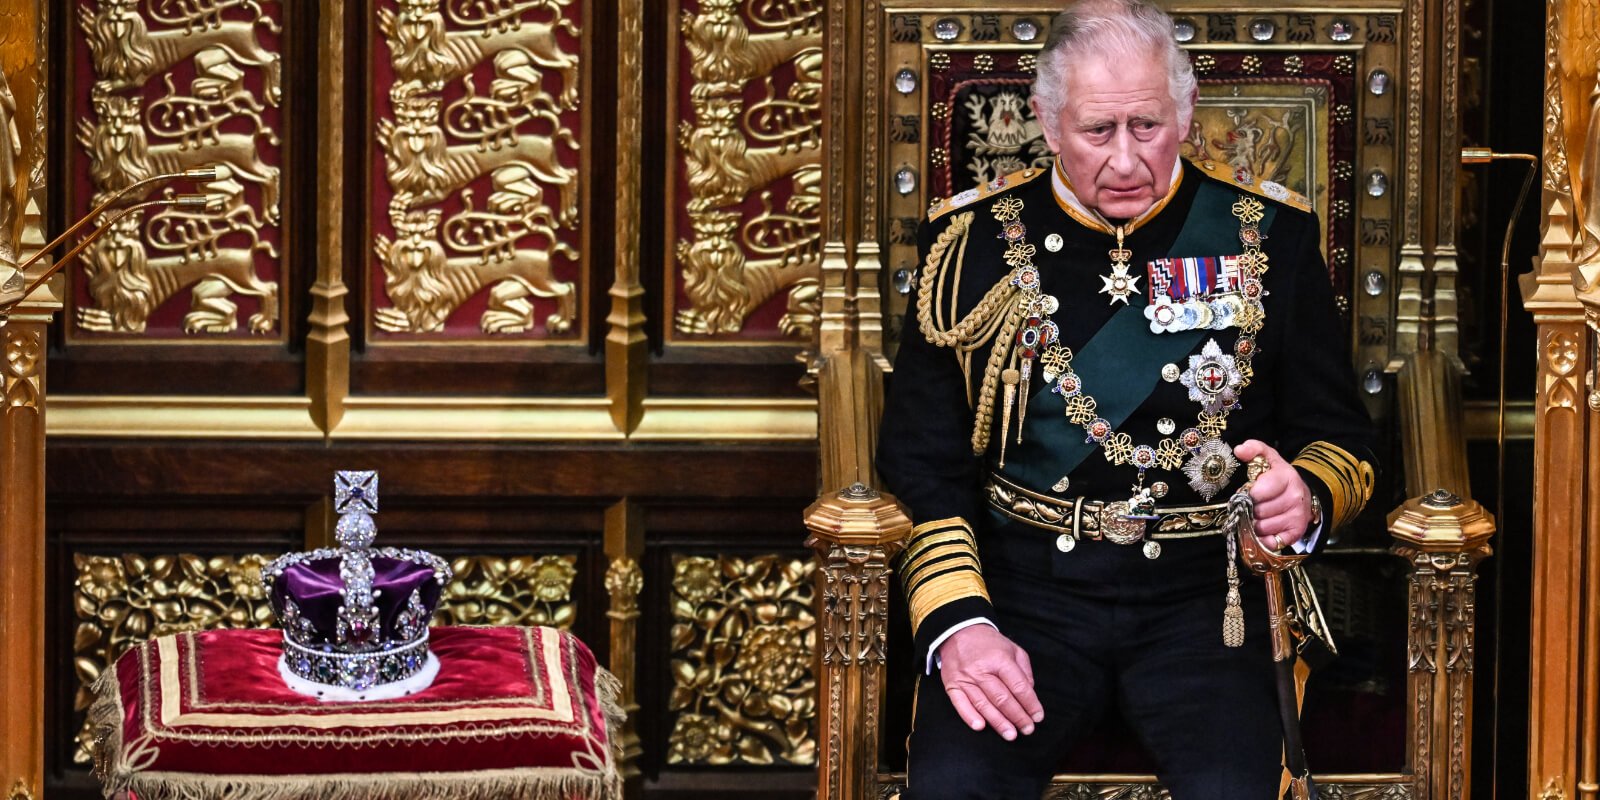 King Charles III will not get to wear the St. Edwards crown until his coronation.